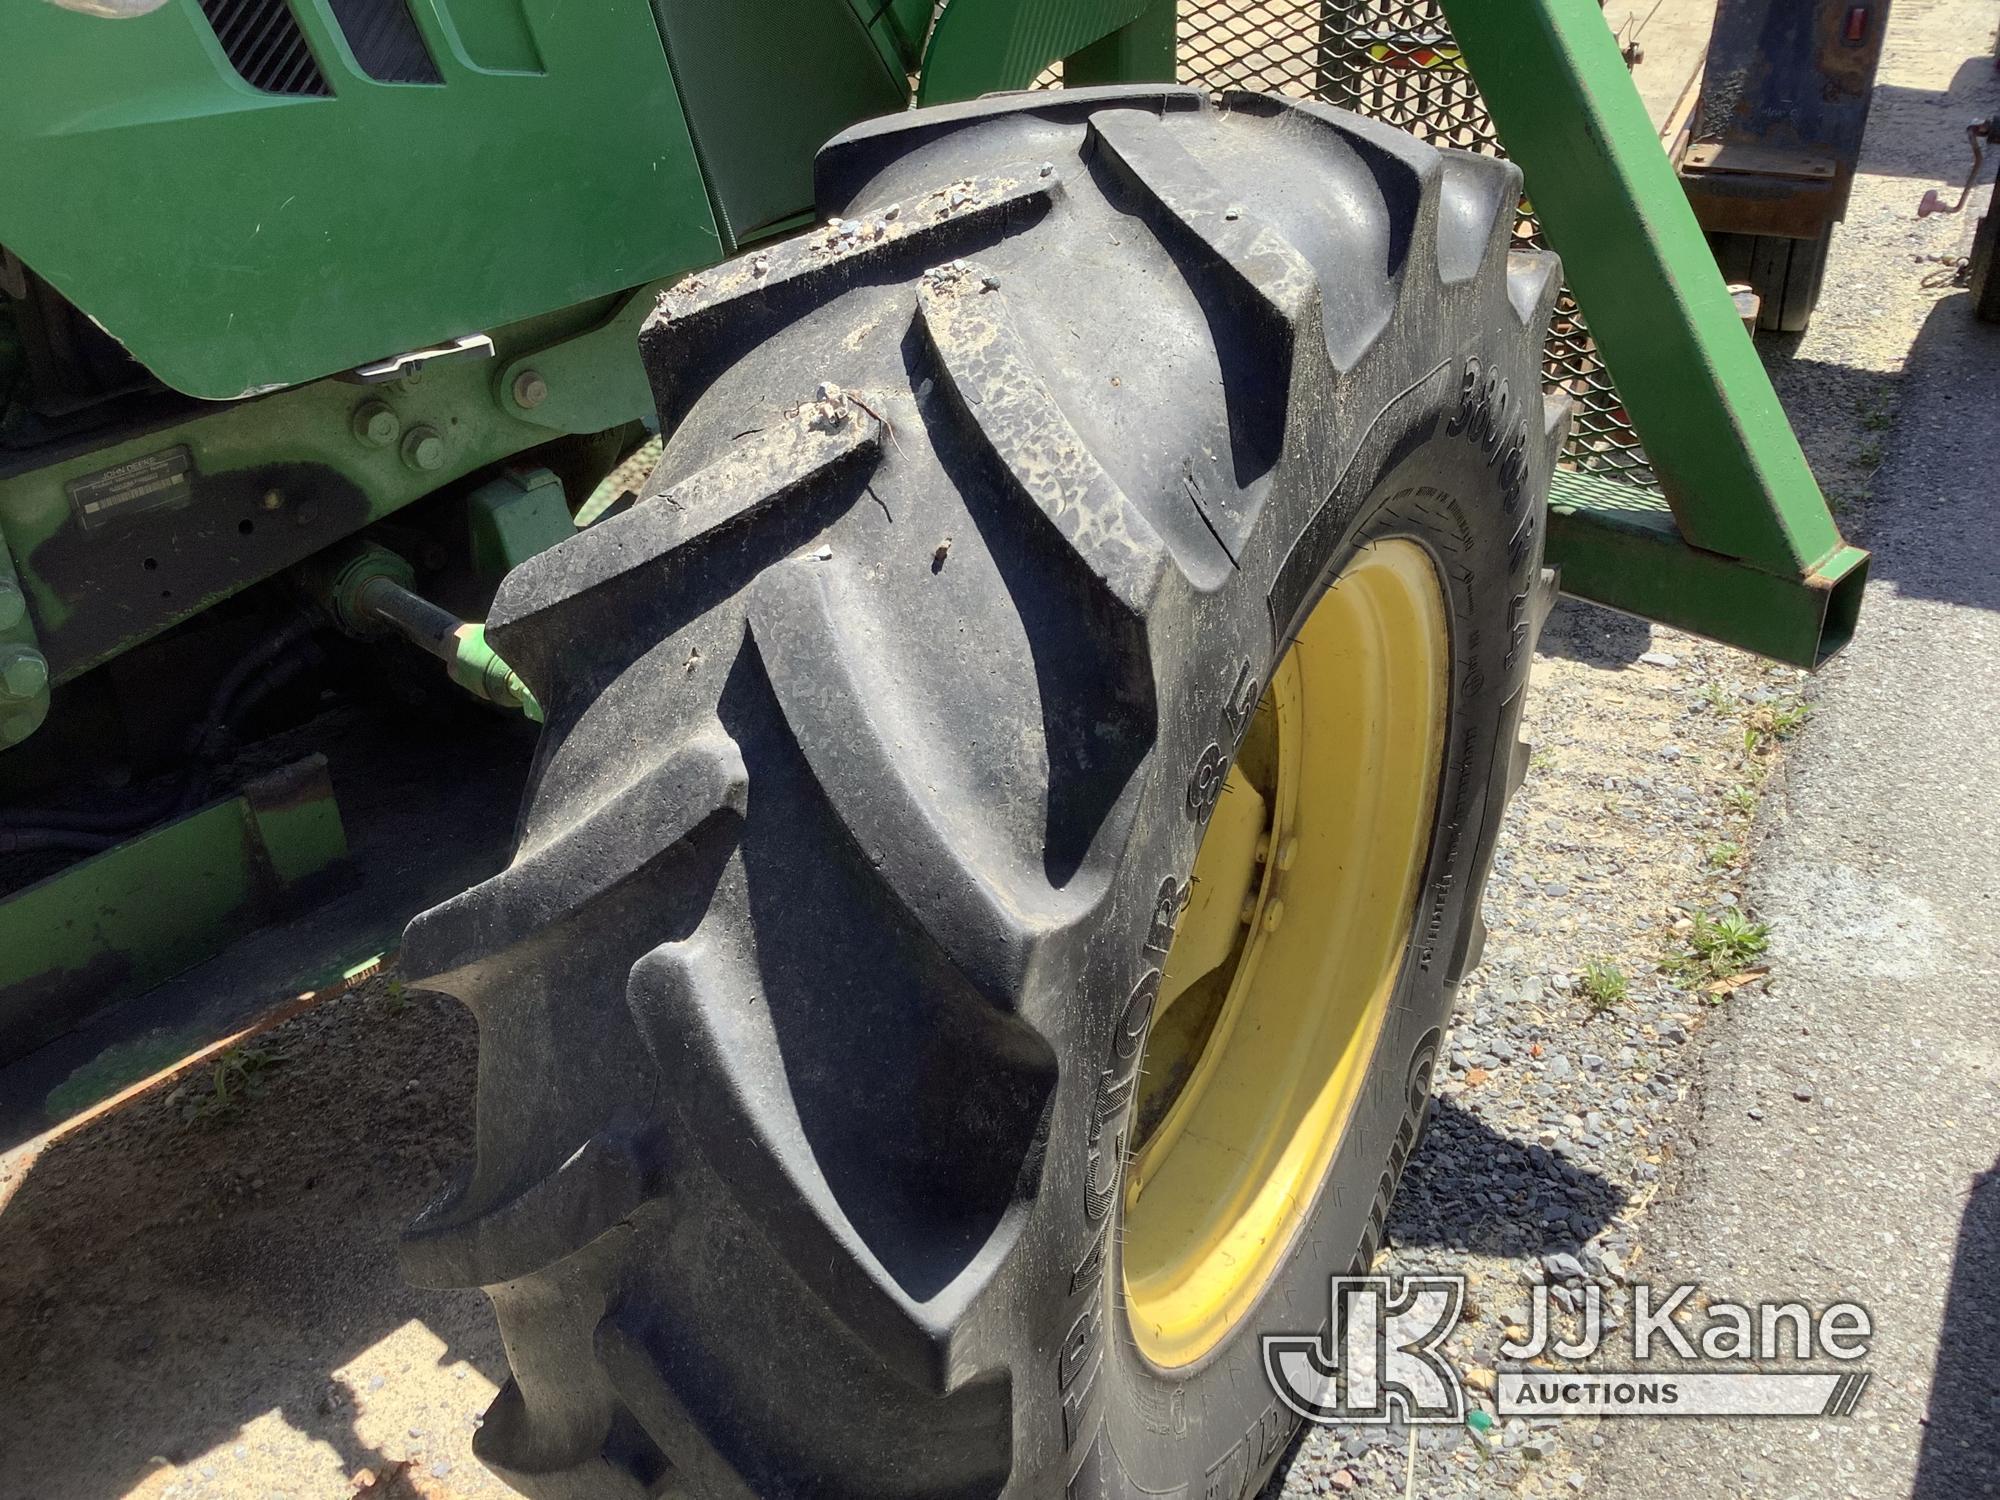 (Harmans, MD) 2016 John Deere 6120M Tractor Not Running, Electrical Fire, Condition Unknown, No Powe